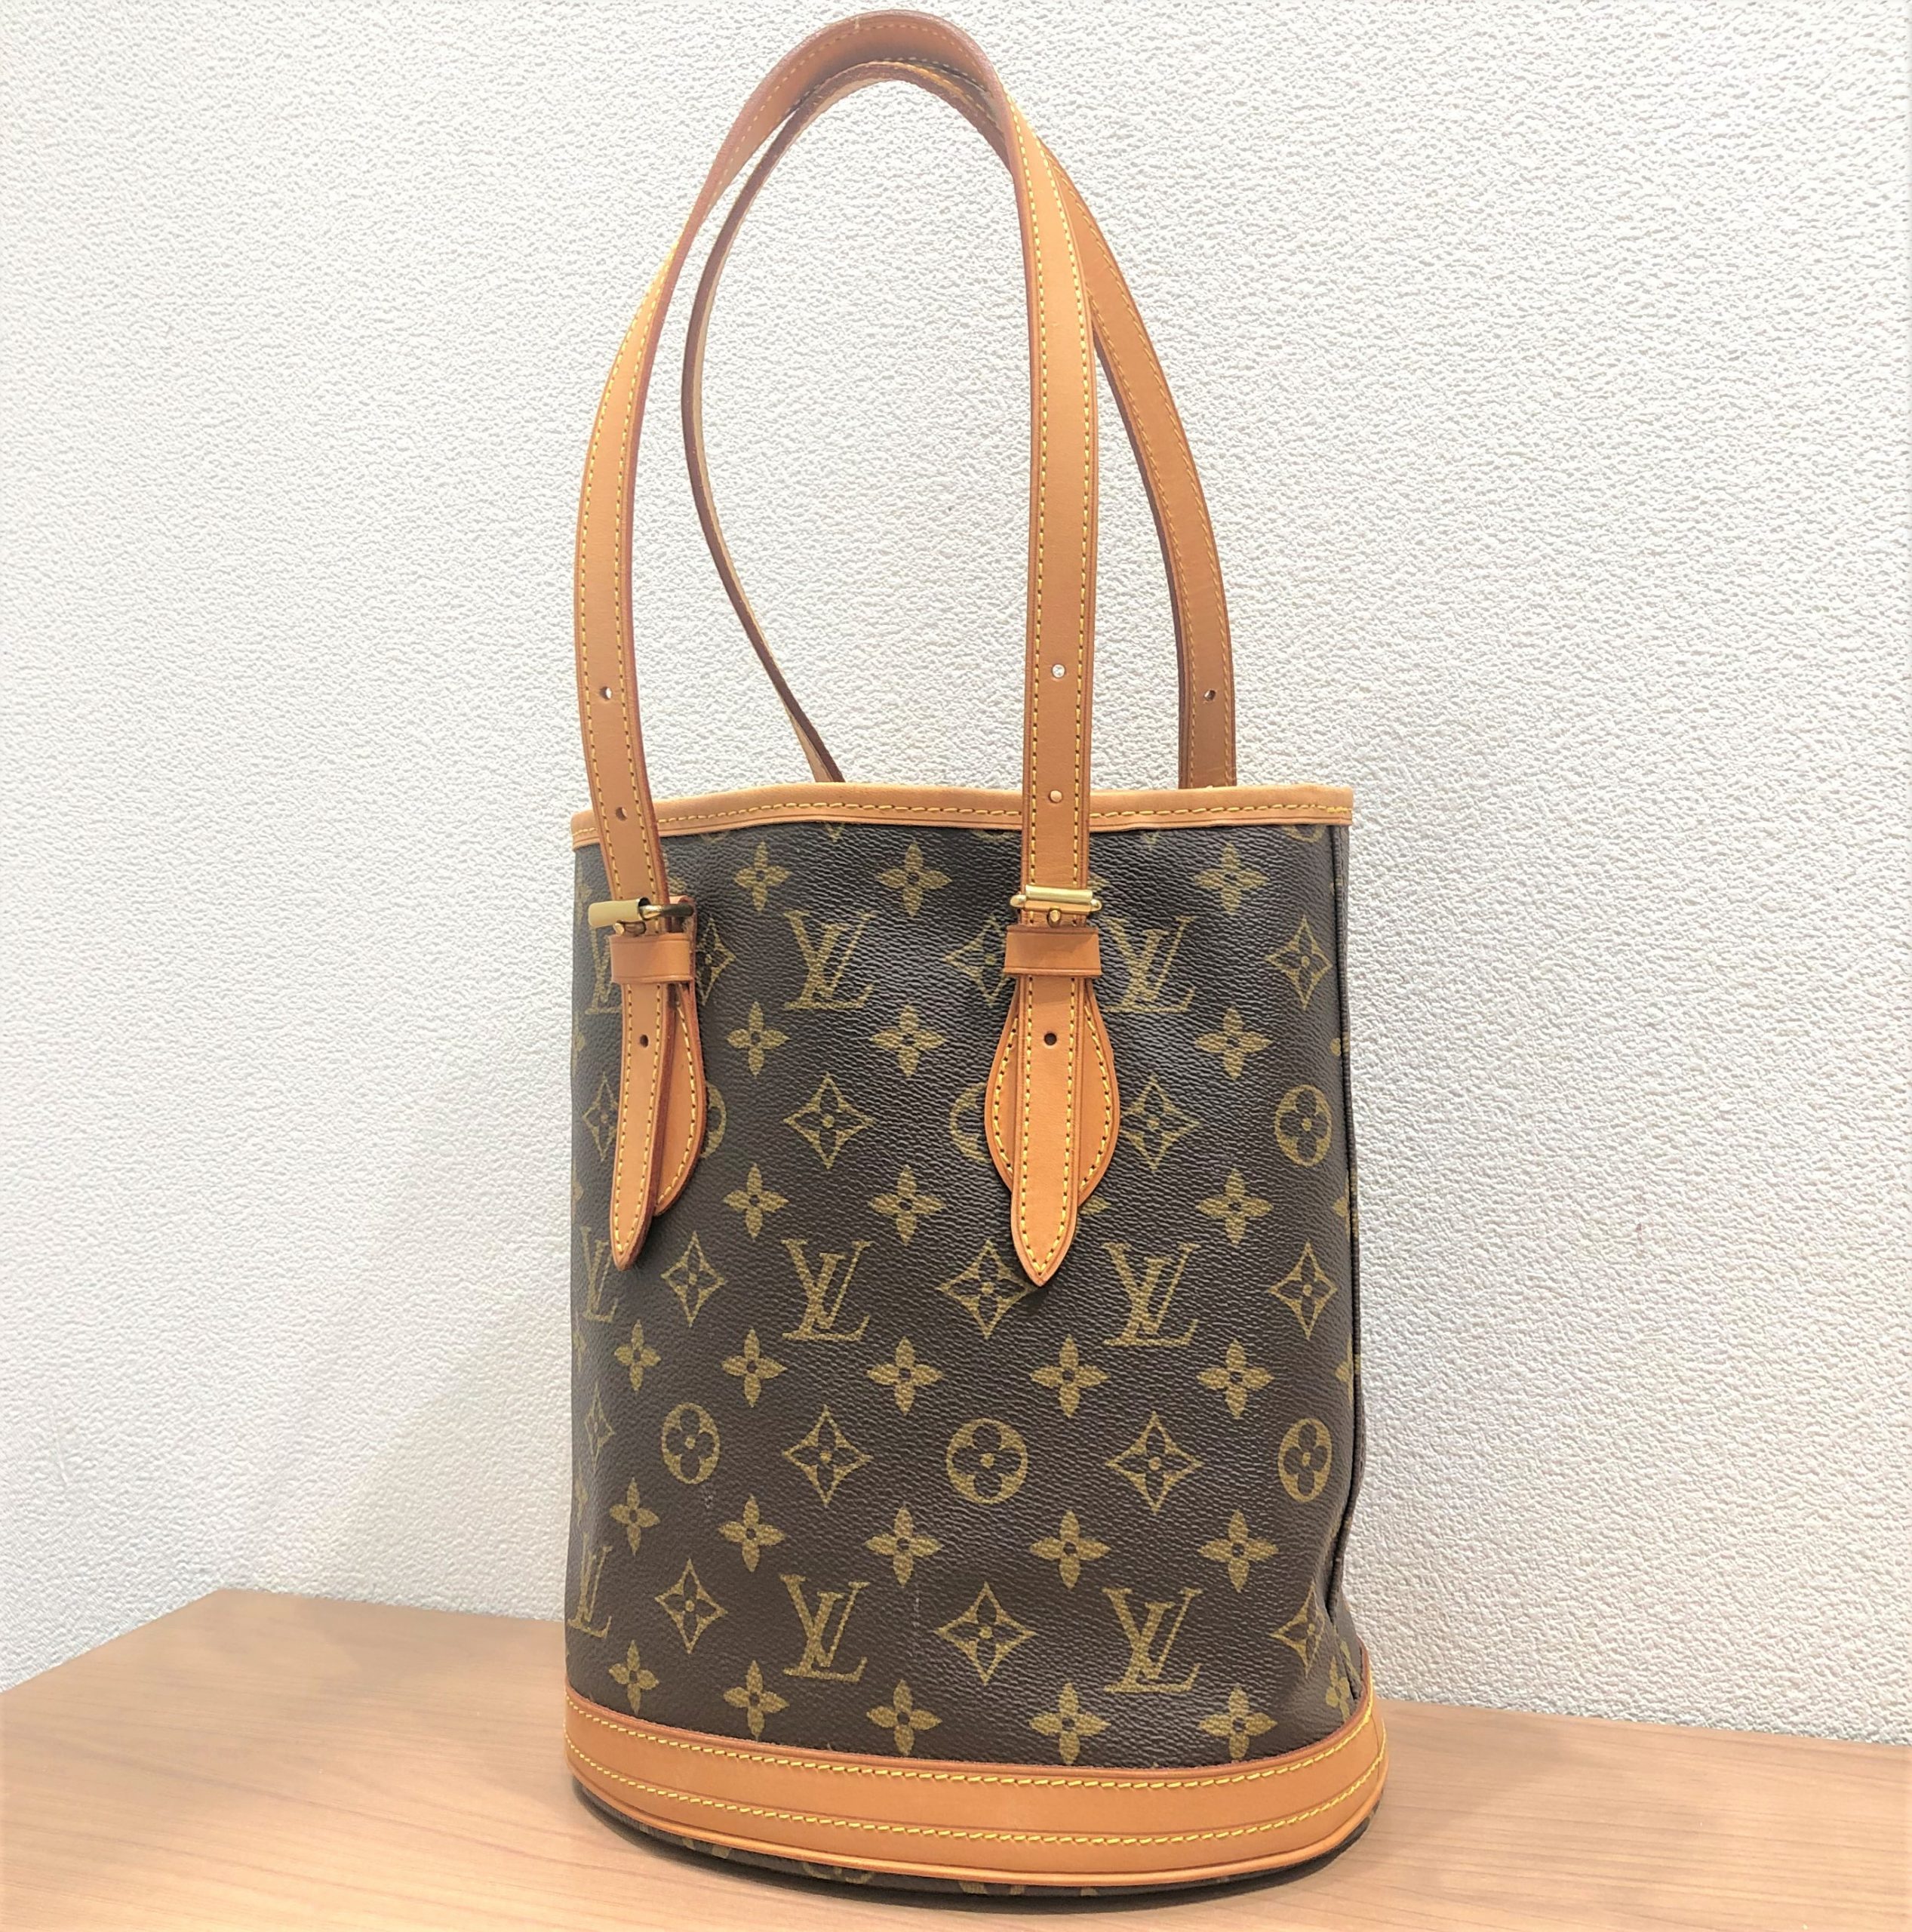 【LOUIS VUITTON/ルイヴィトン】モノグラム バケットPM M42238 トートバッグ